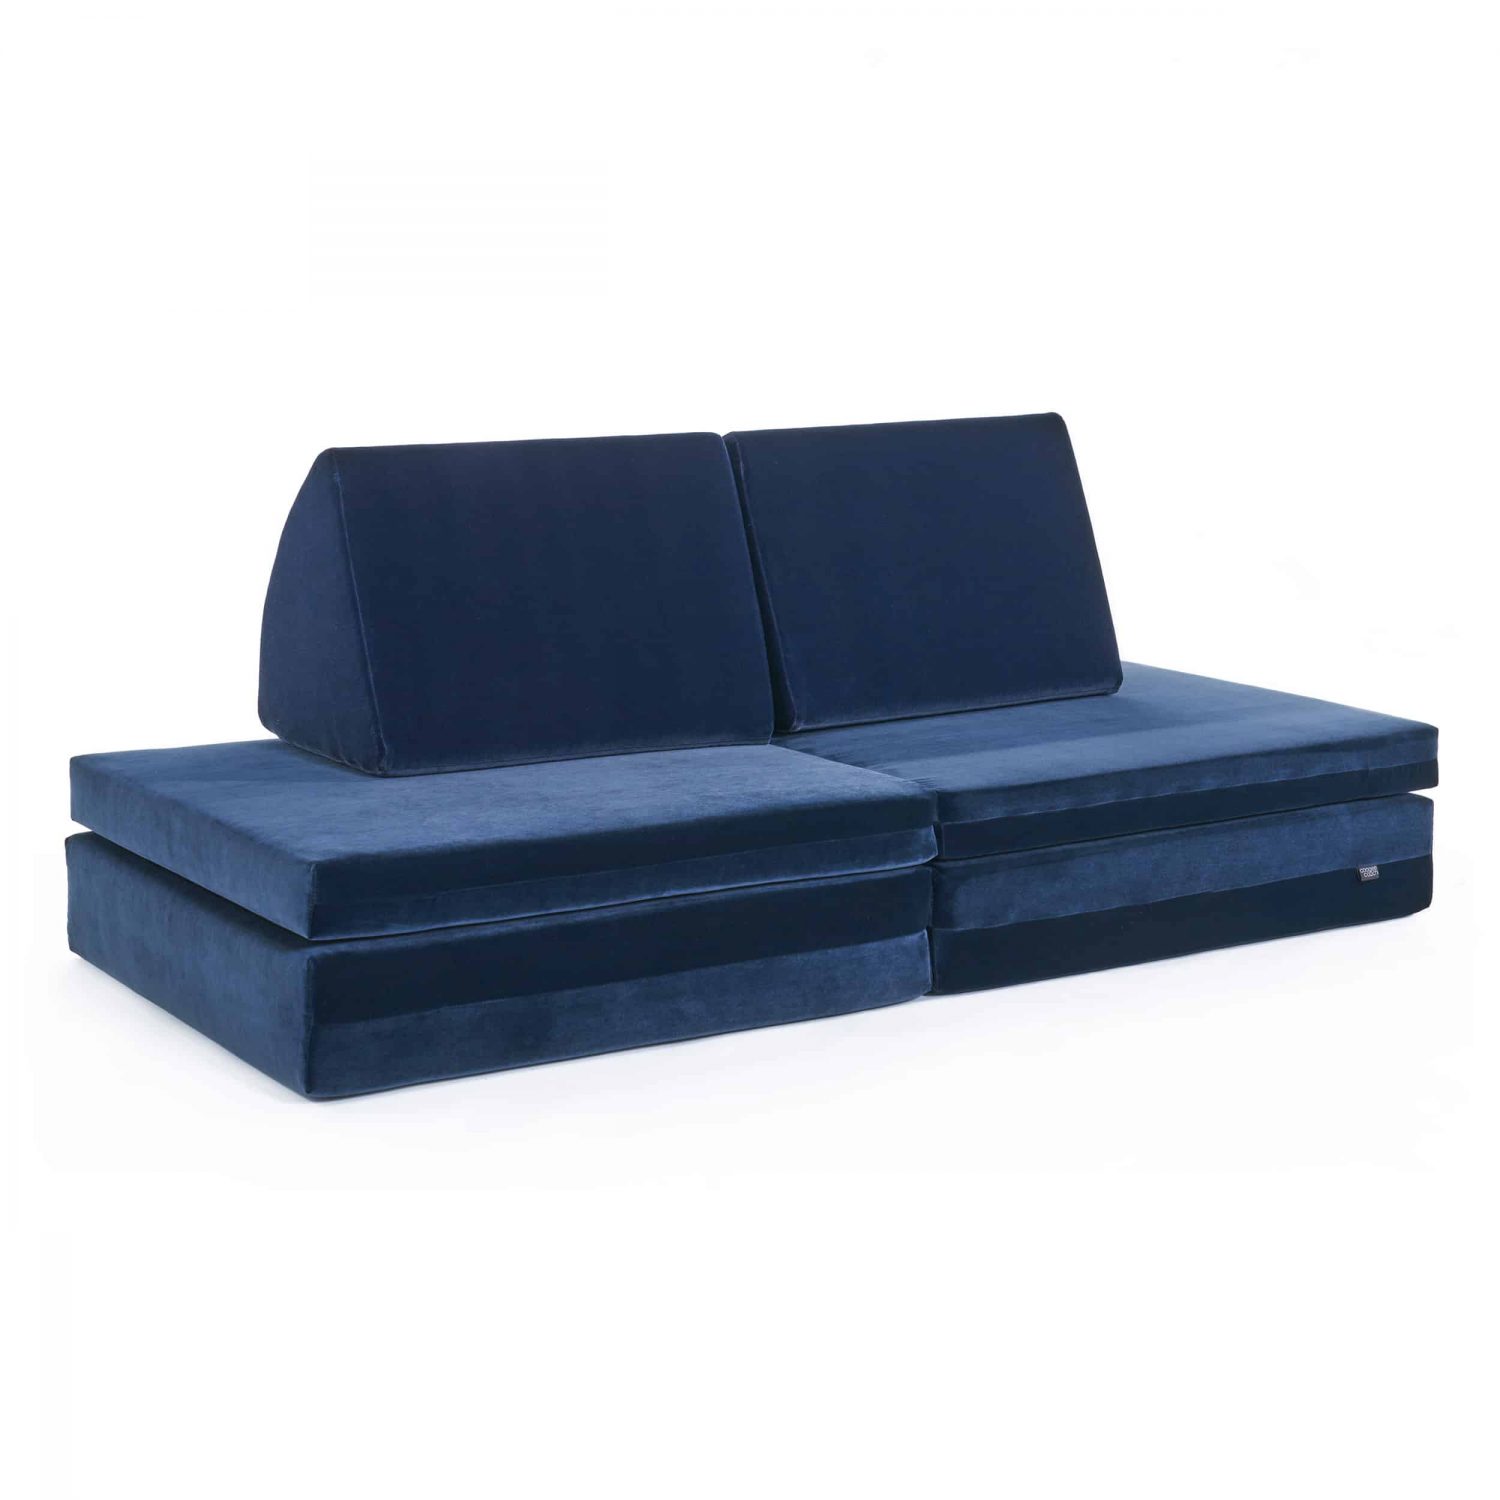 coogeecouch | Kindersofa | Serie: youniverse | Farbe: night-blue dunkelbau | Ansicht: Front schräg | made in Germany